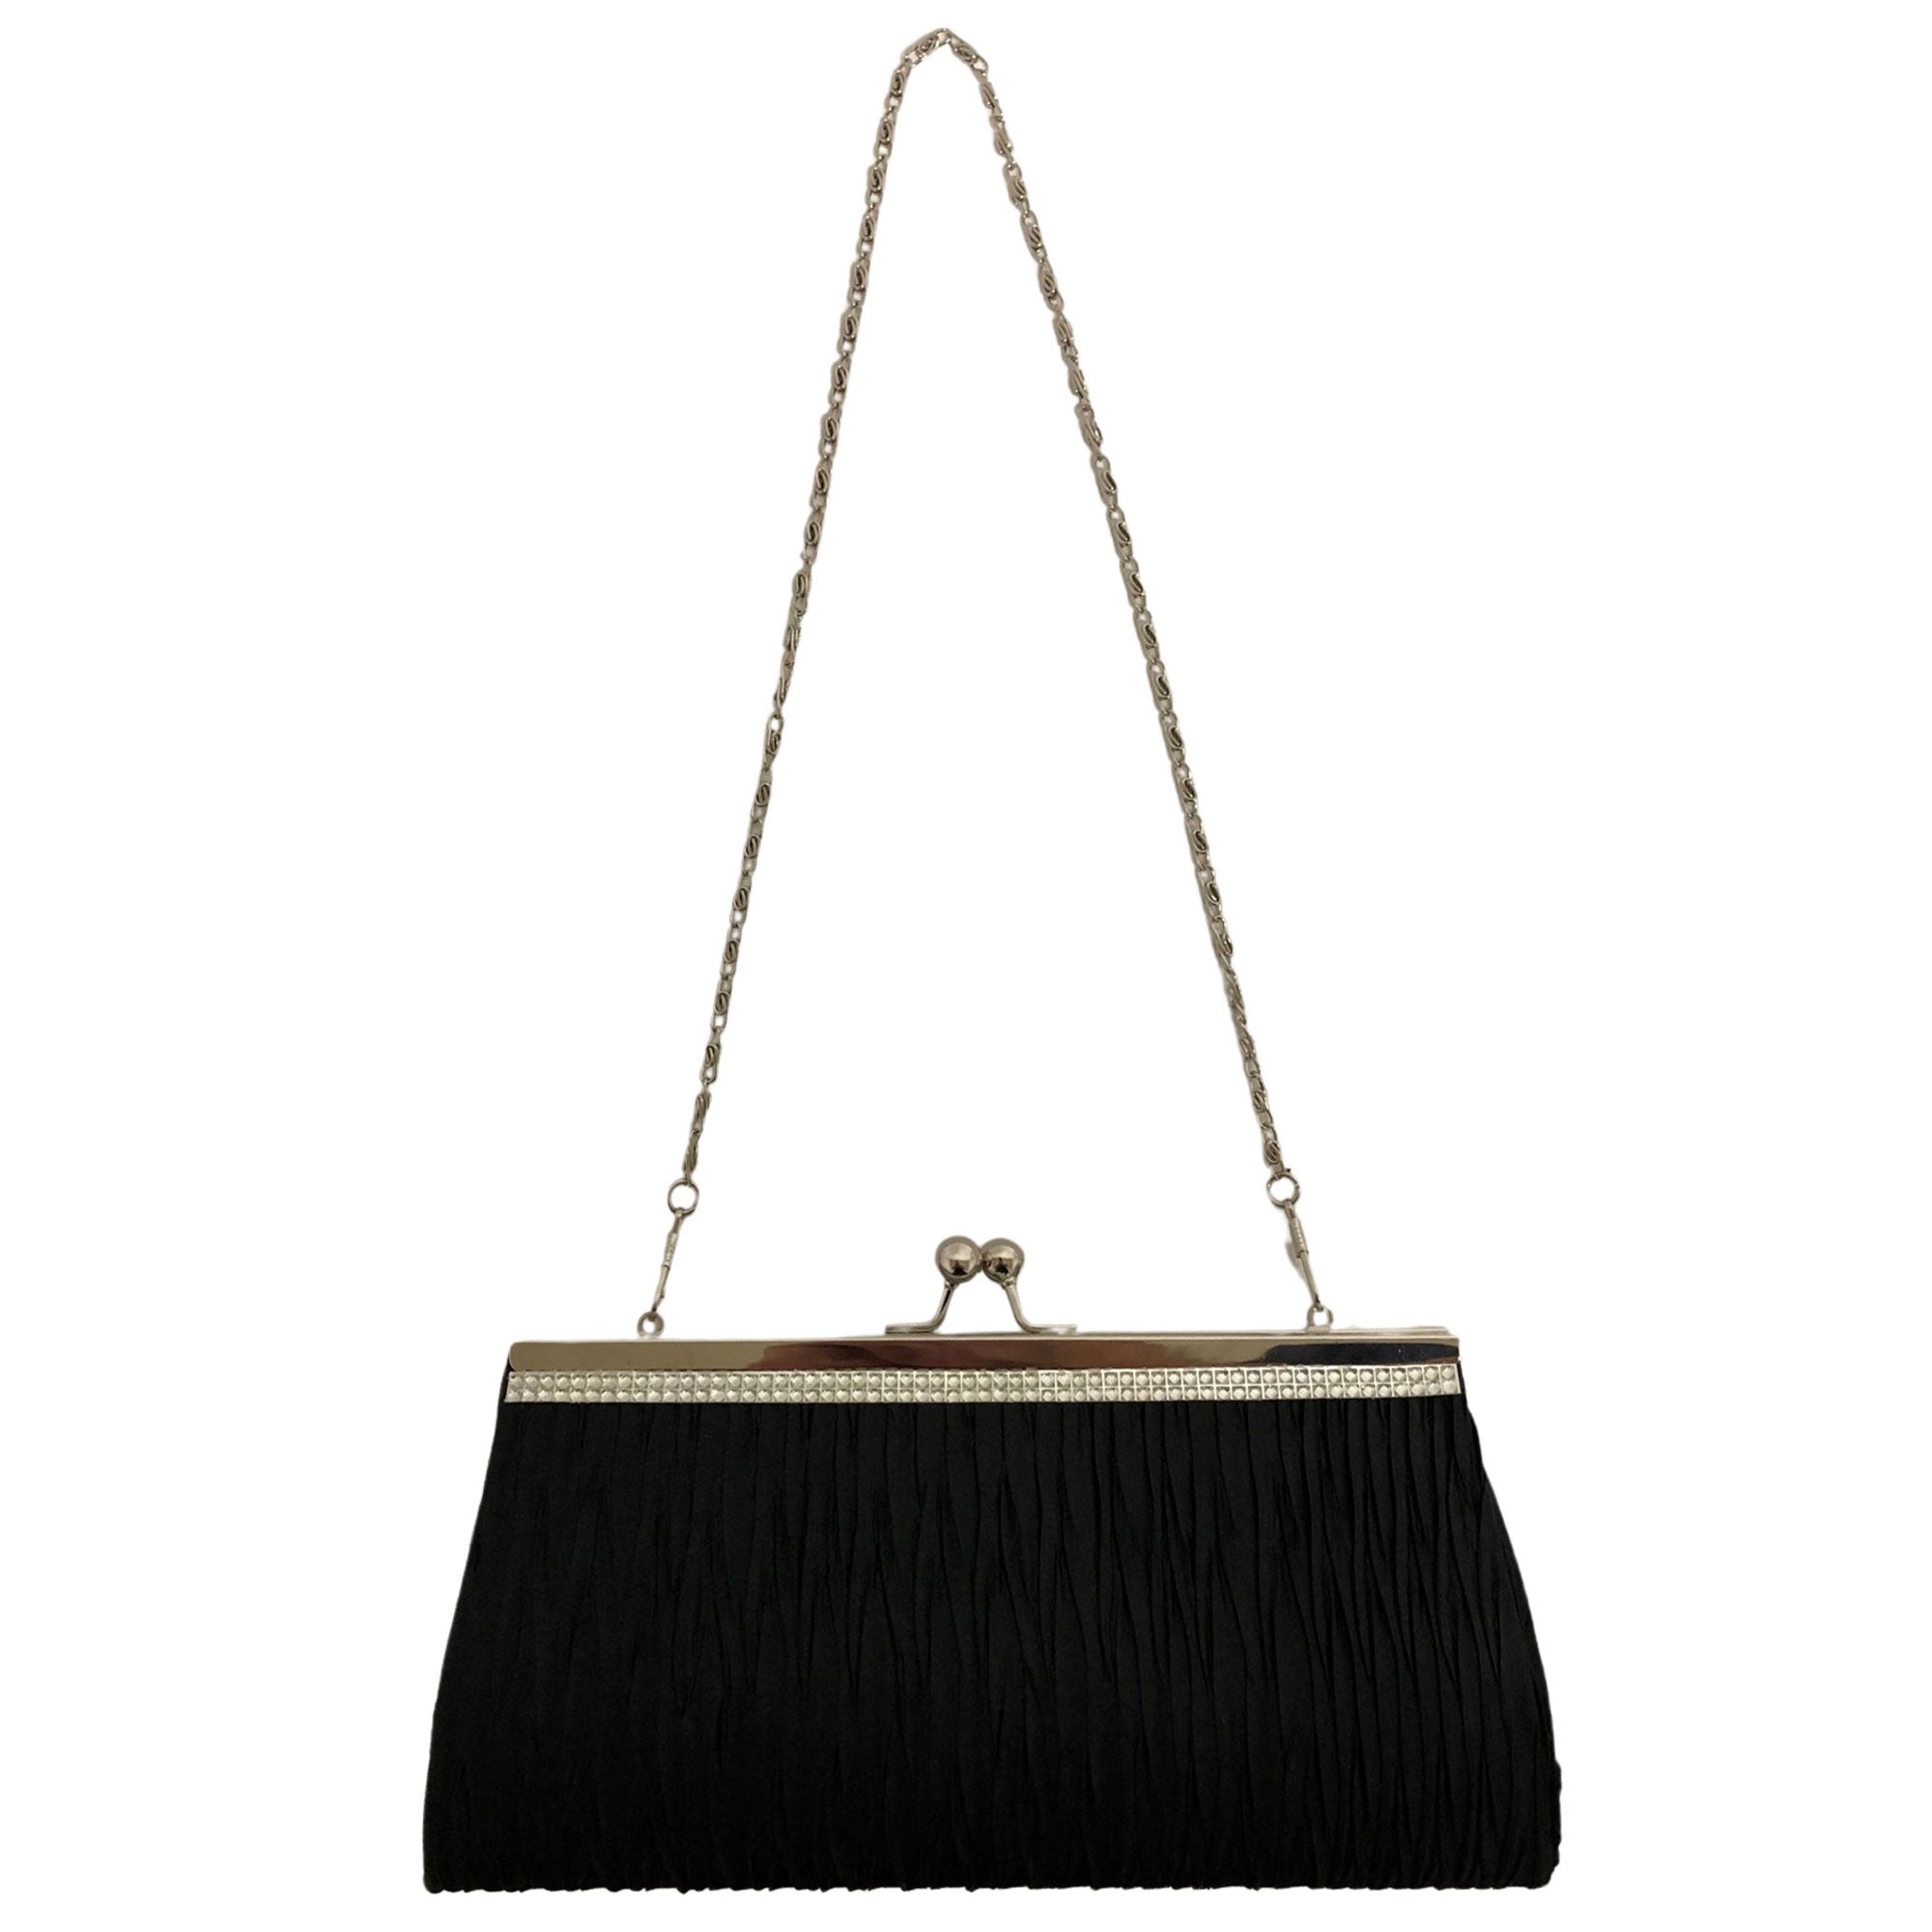 CLEARANCE PLEATED EVENING BAG IN BLACK (CASE OF 48 - $1.50 / PIECE) Wholesale Black Pleated Evening Bag SKU: EB1020-PLEATED-BLK-48